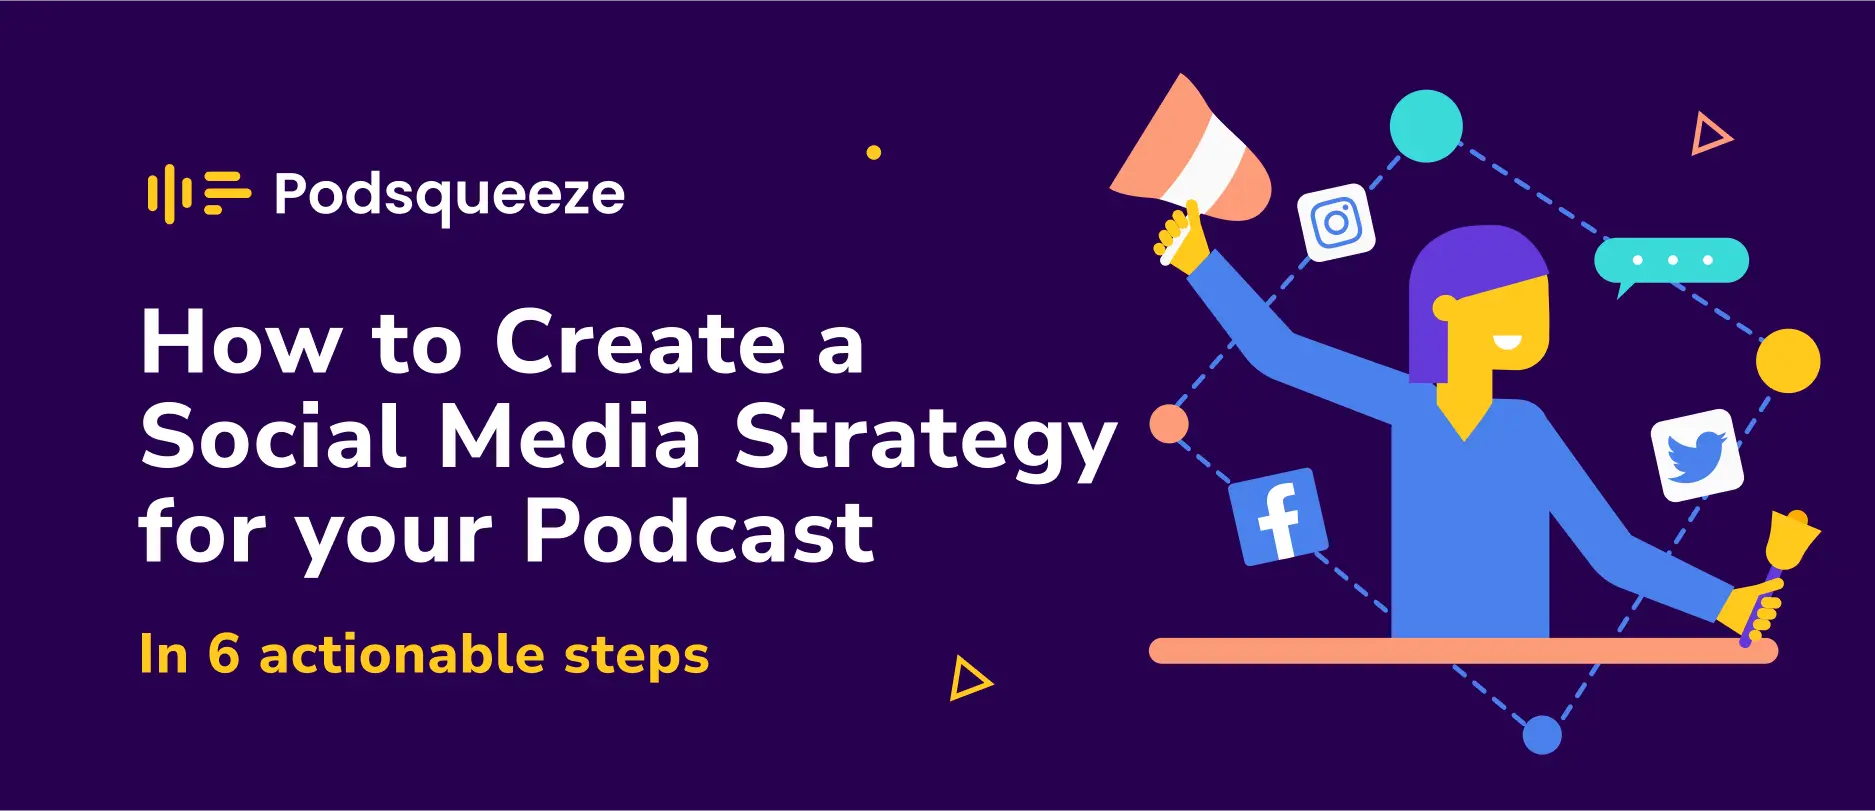 social-media-strategy-for-podcasts-cover-article